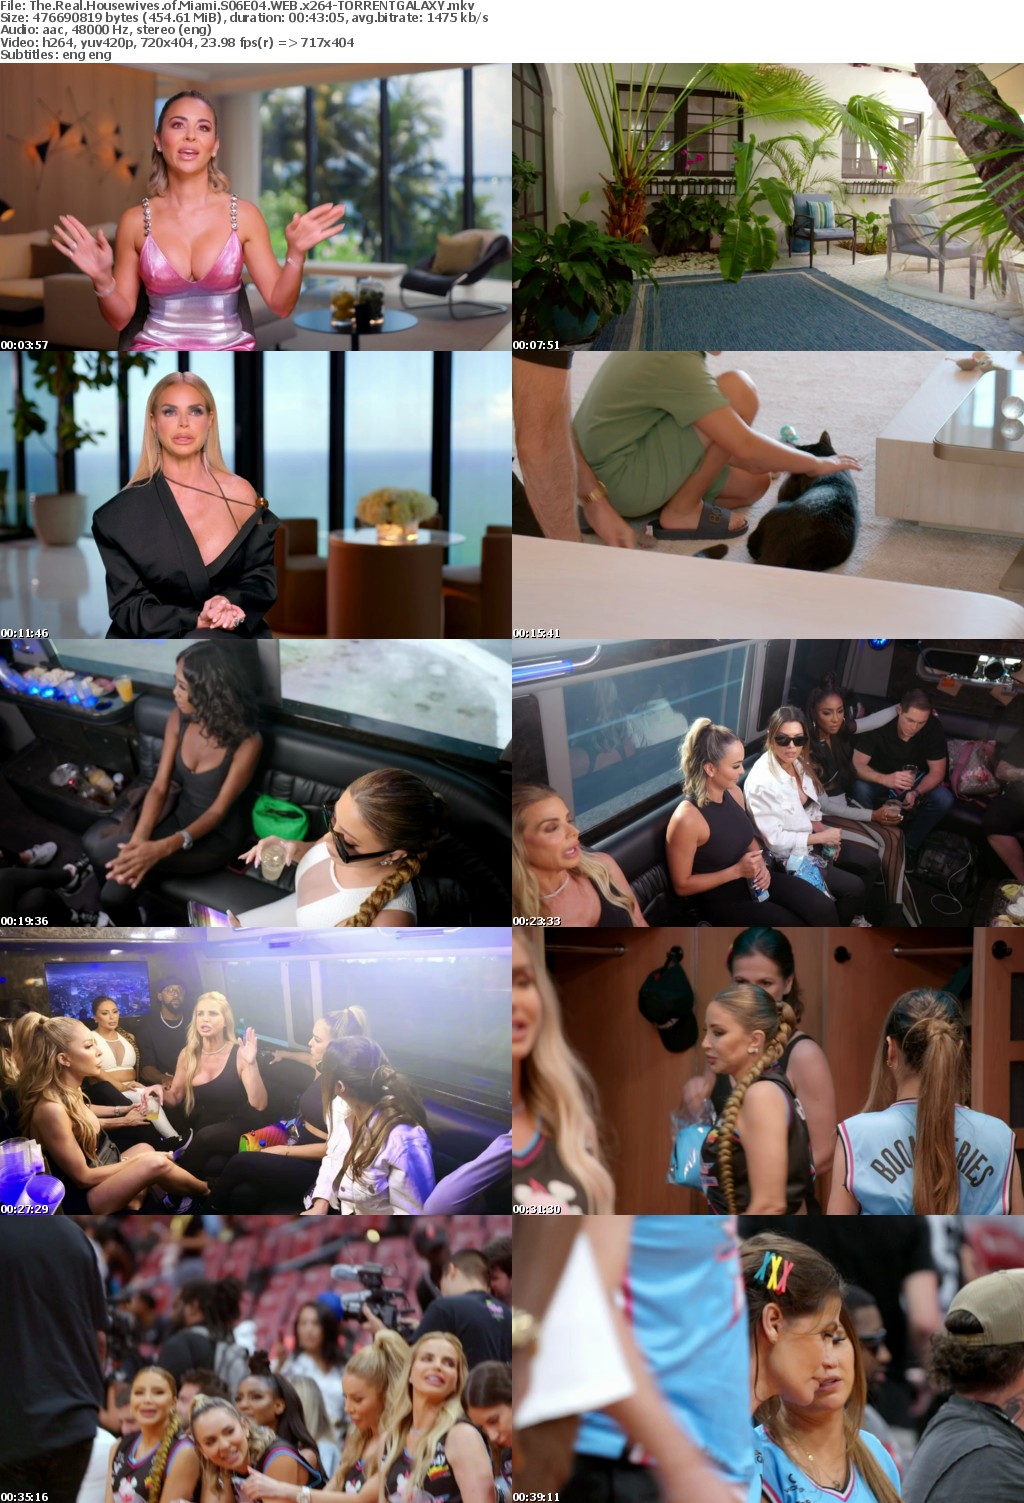 The Real Housewives of Miami S06E04 WEB x264-GALAXY